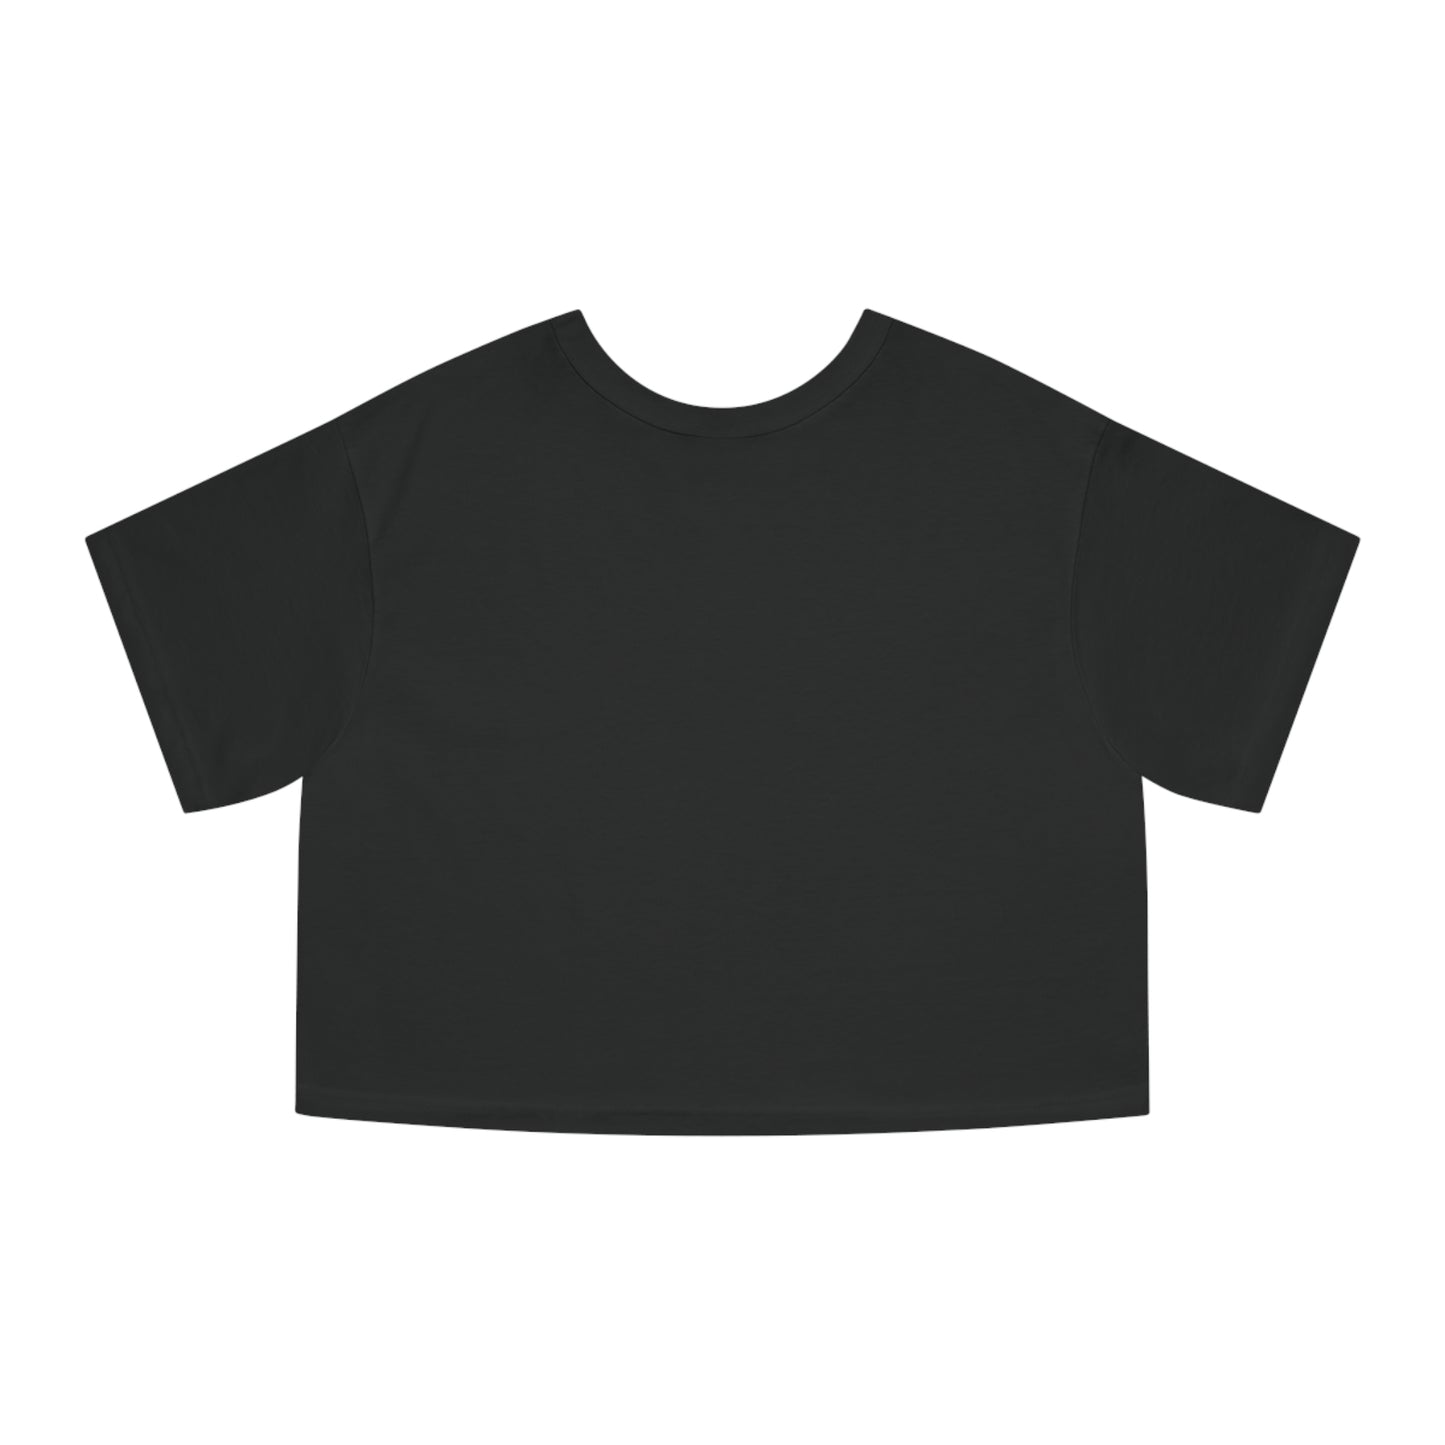 If You're Reading This Right Cropped T-Shirt